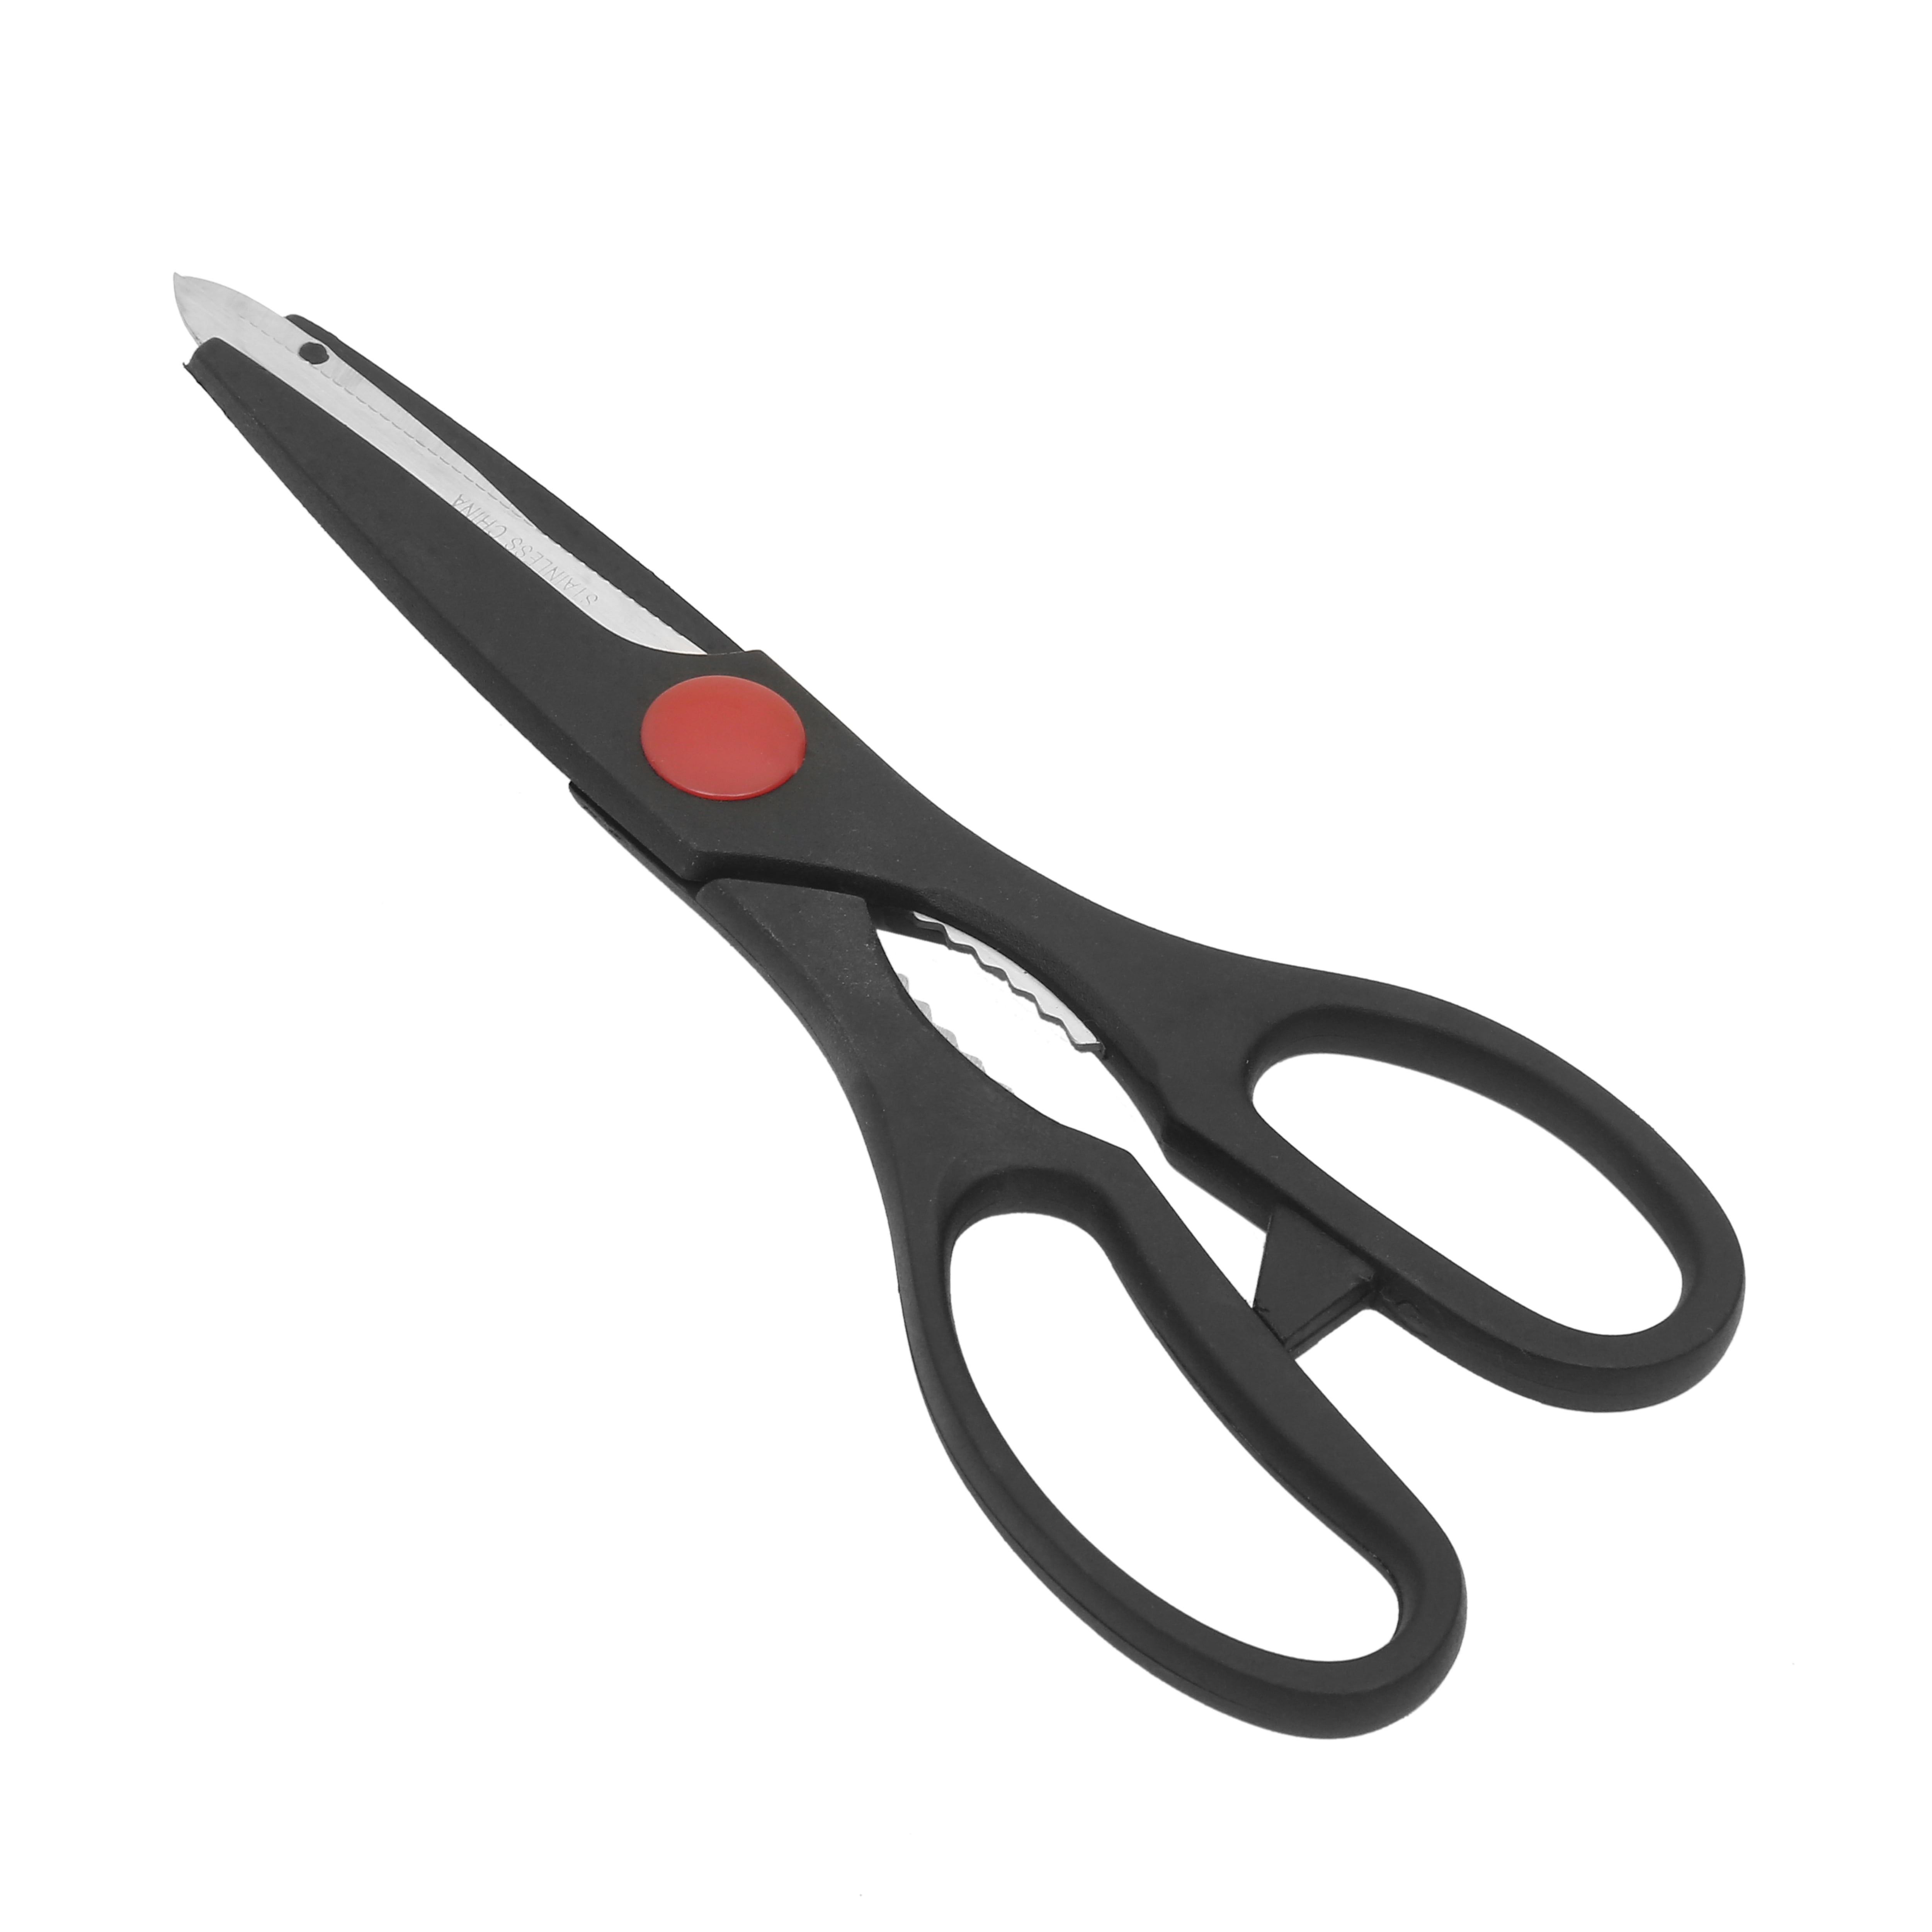 Mainstays Stainless Steel Utility Scissors Kitchen Shears with Black Grip 